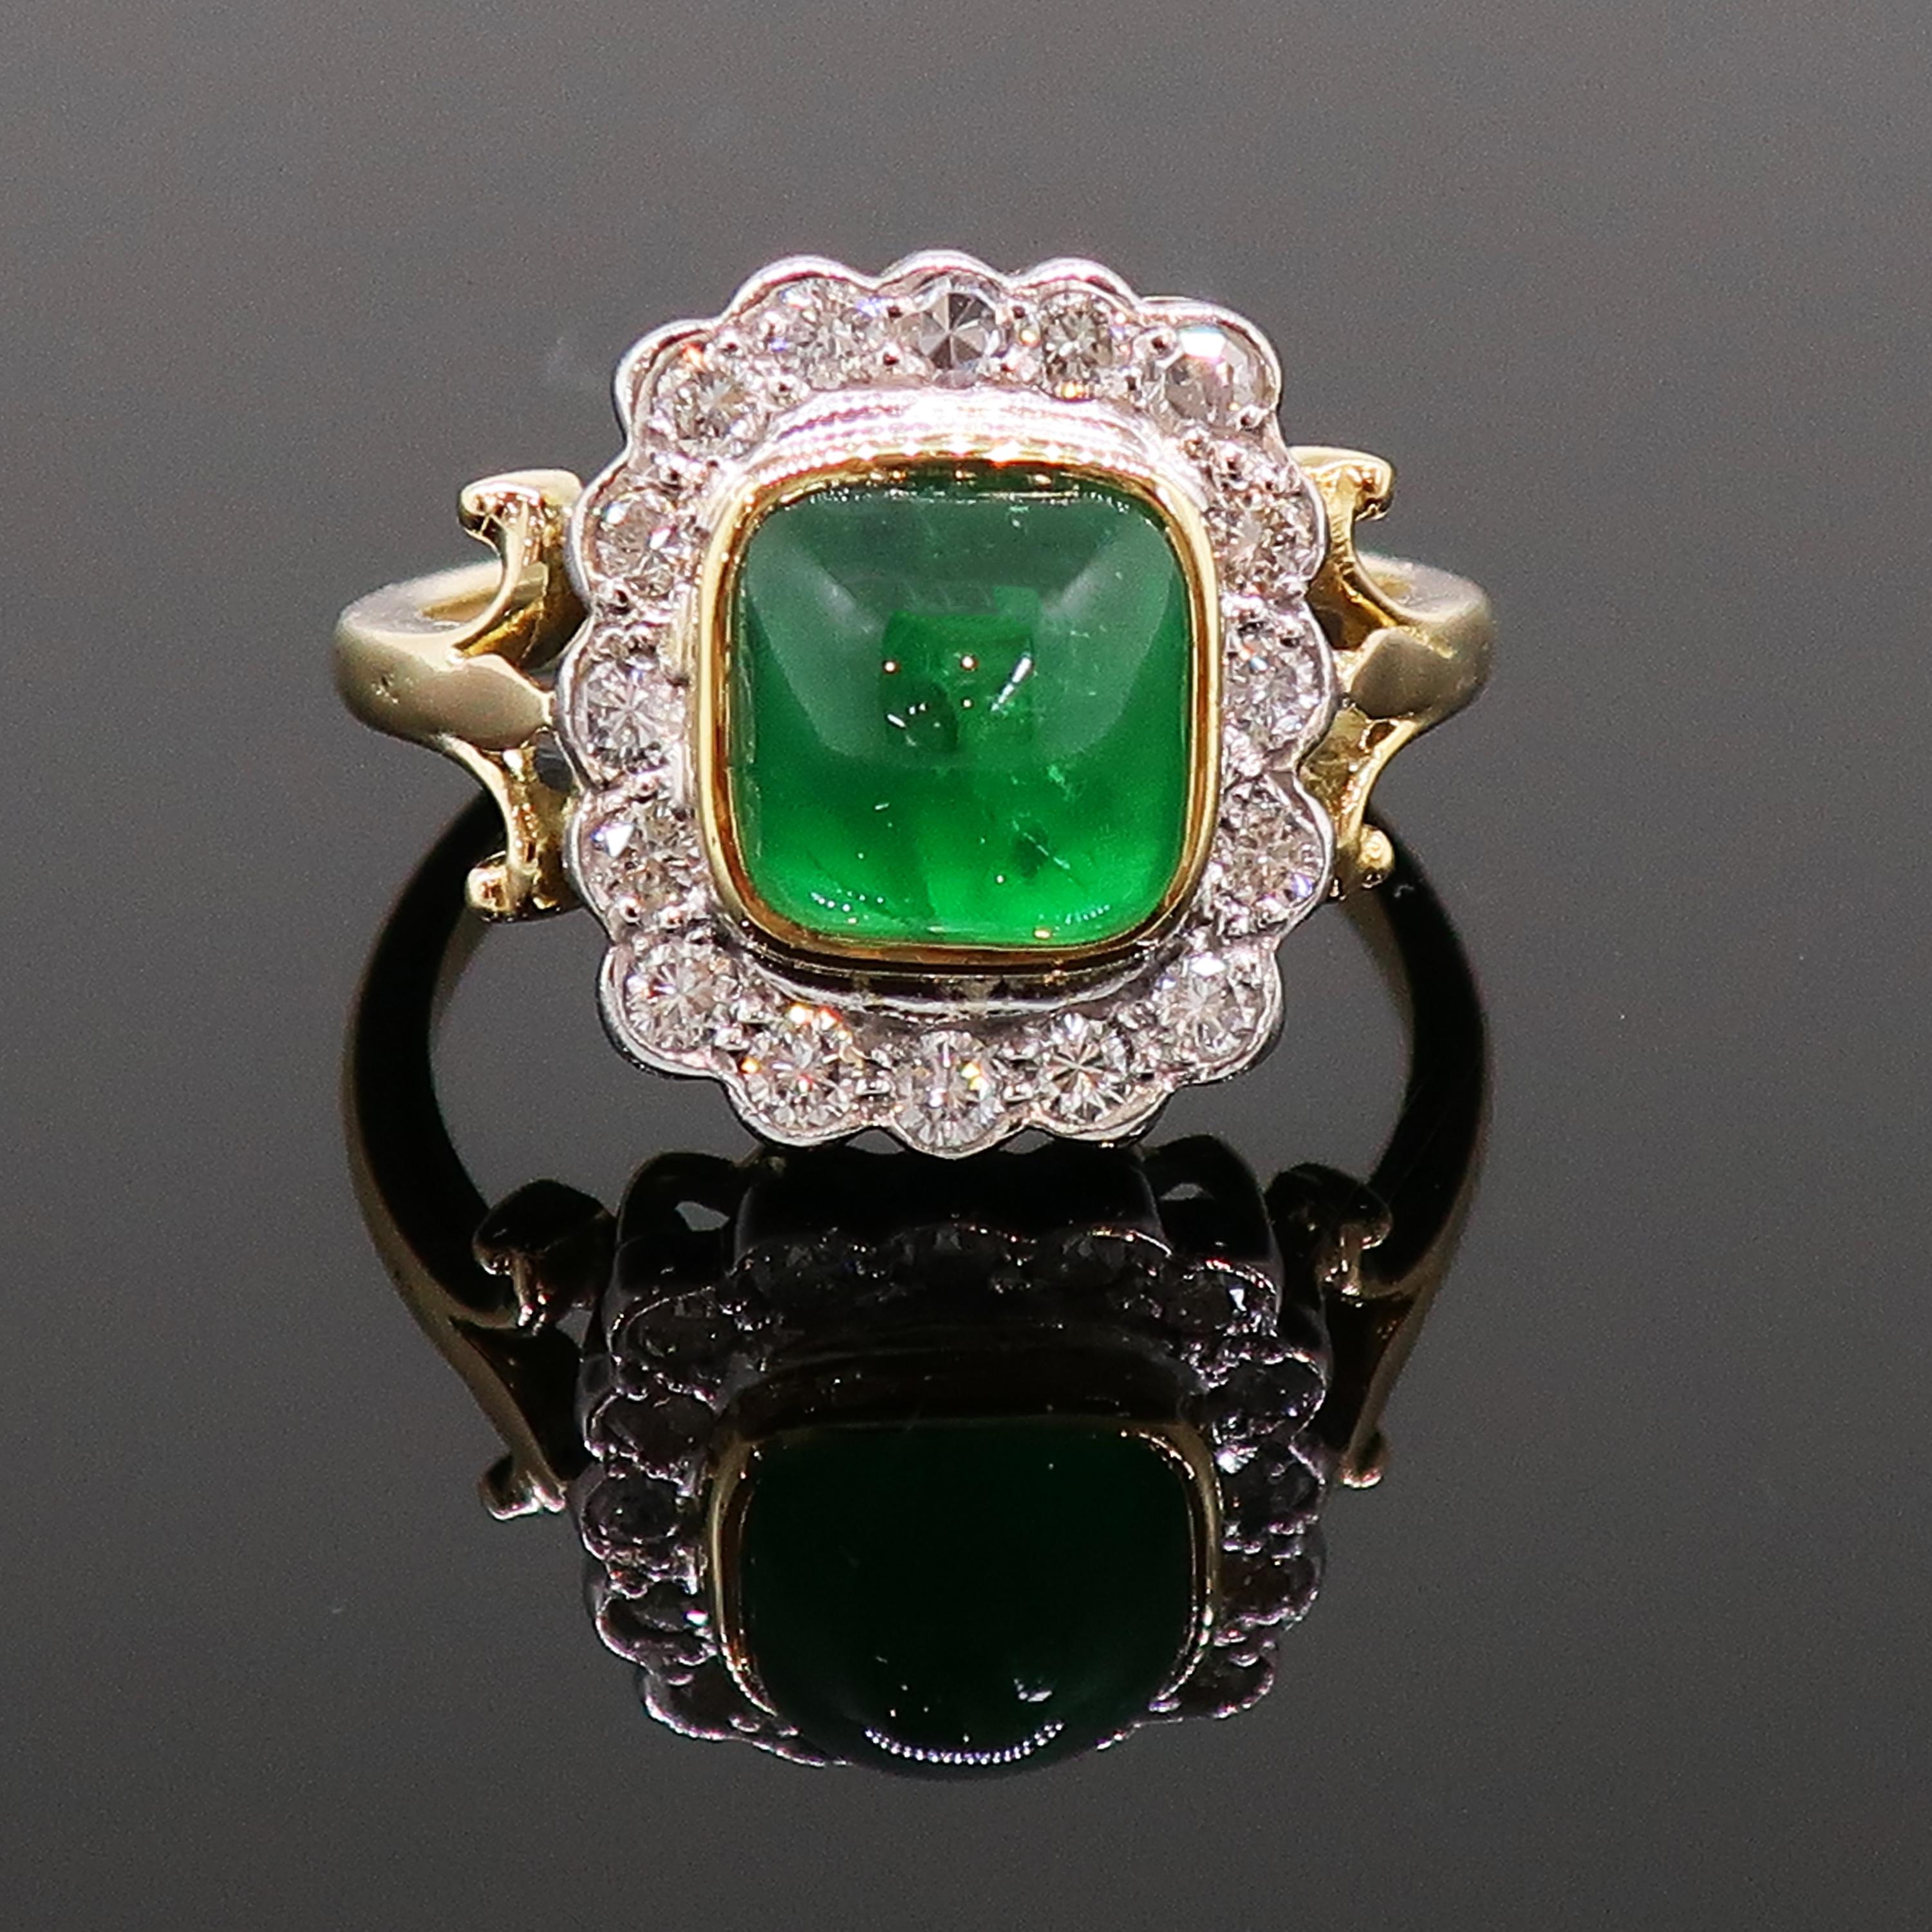 Cabochon Emerald and Diamond Cluster Ring 18 Karat Yellow and White Gold

Dazzling cushion cut cabochon emerald and diamond cluster ring. Stunning central cushion sugarloaf cabochon emerald encased in a yellow gold bezel, surrounded by sixteen white